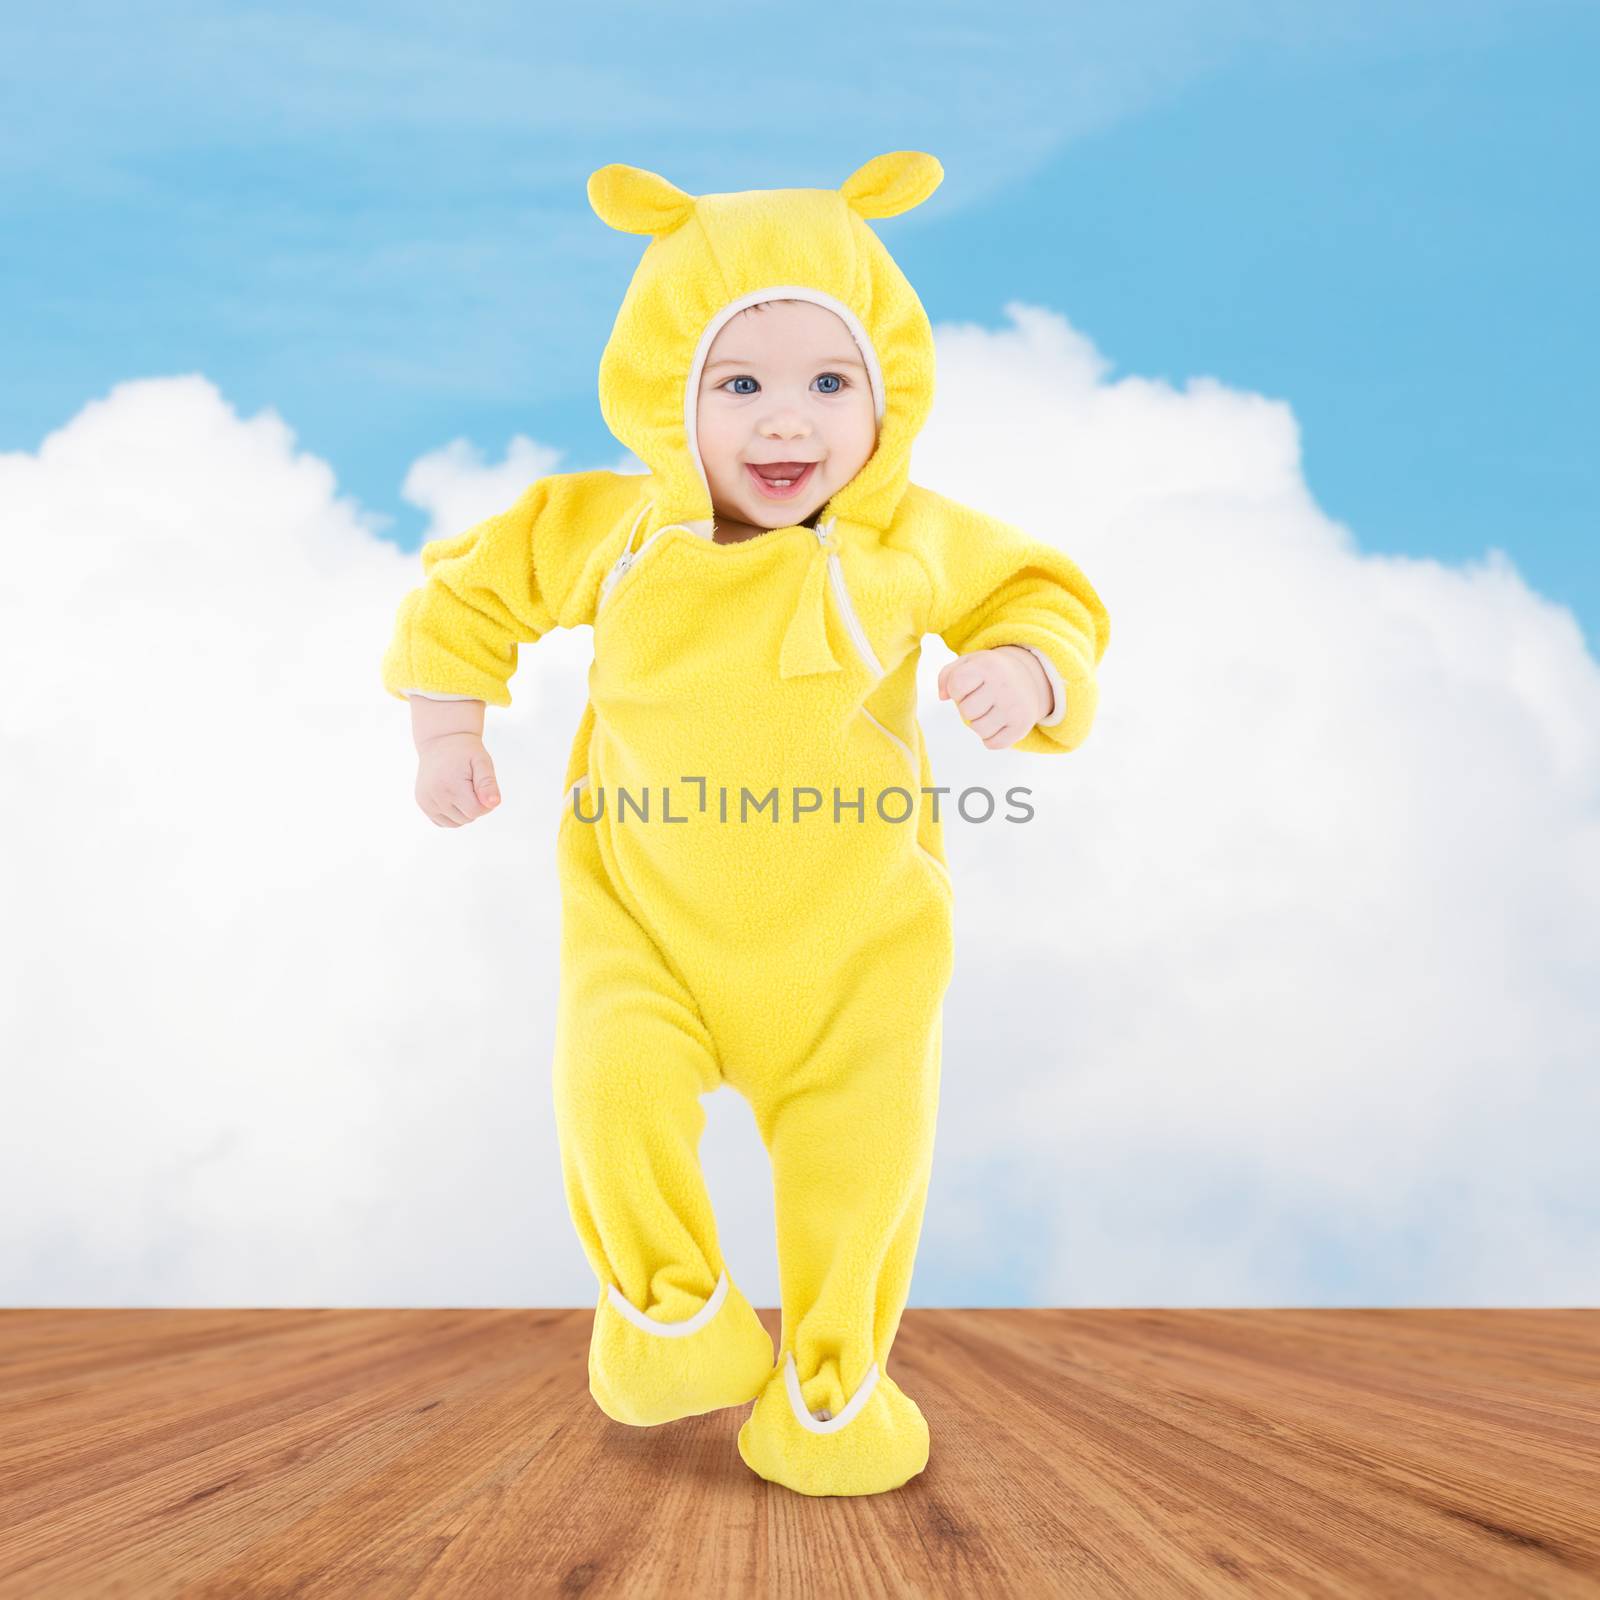 people, children, achievement and happiness concept - happy baby in yellow suit making first steps over wooden floor and blue sky background